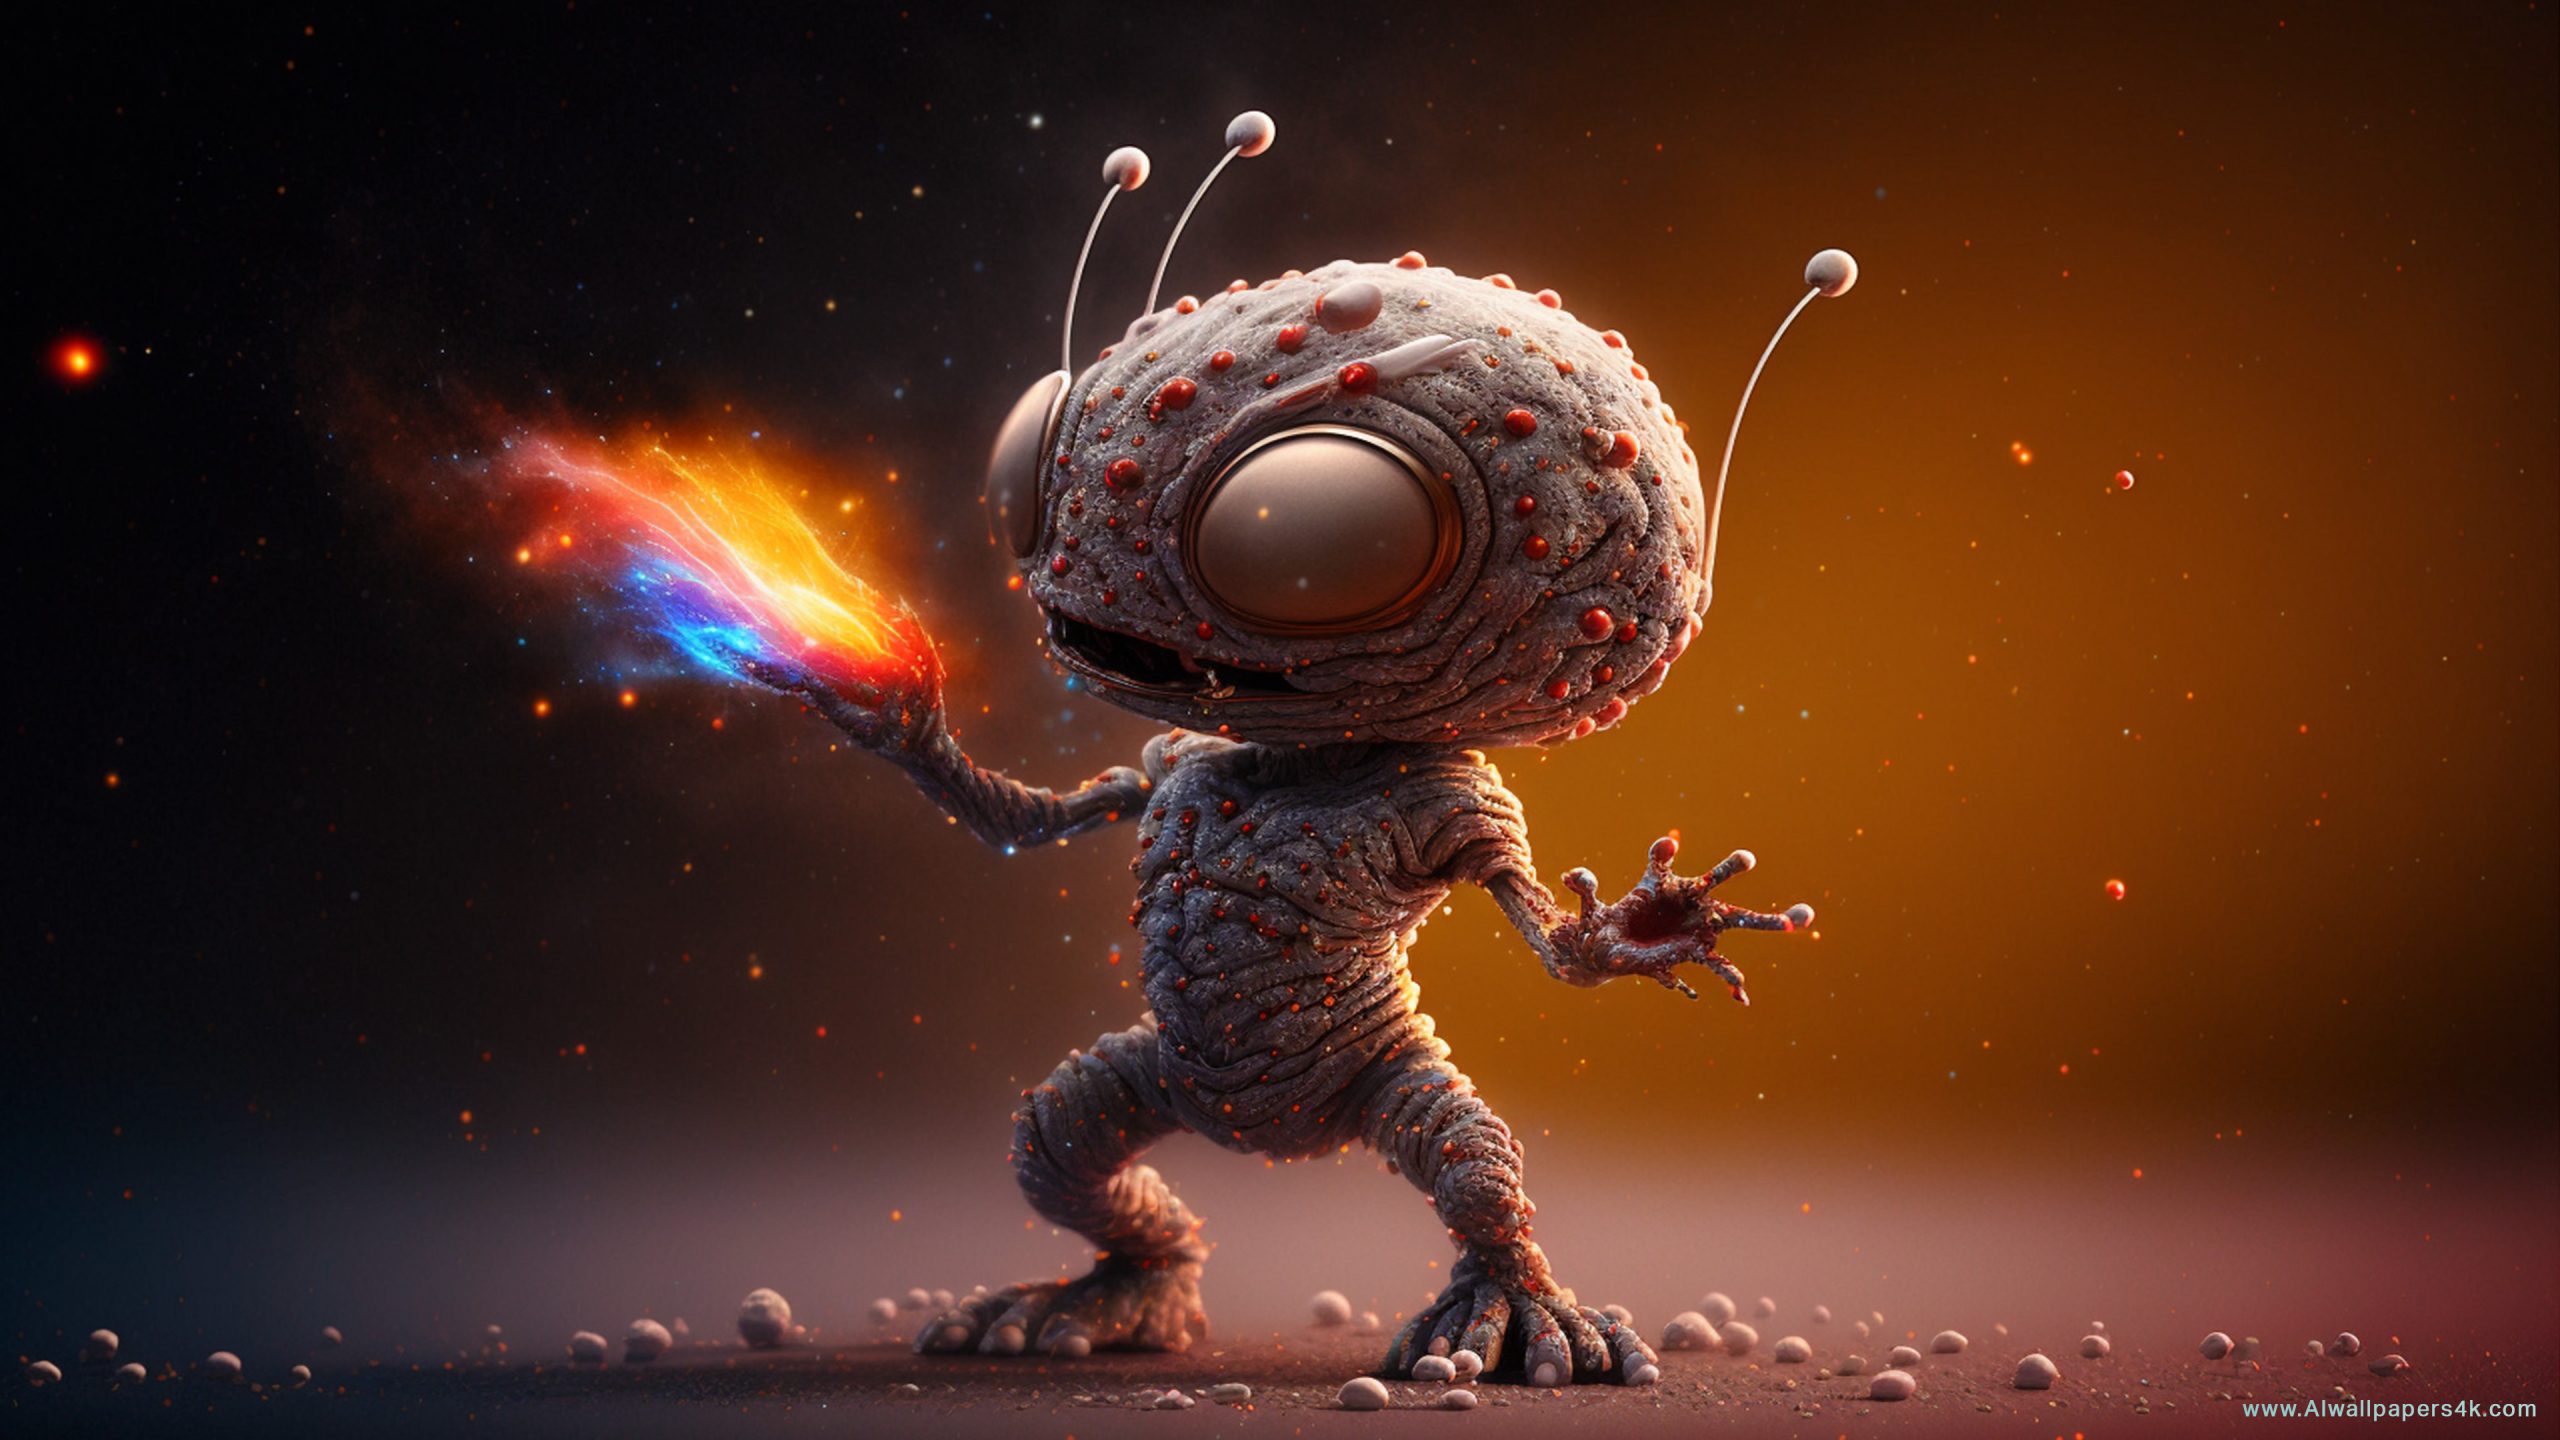 Alien on Milky Way galaxyaction pose red nose render